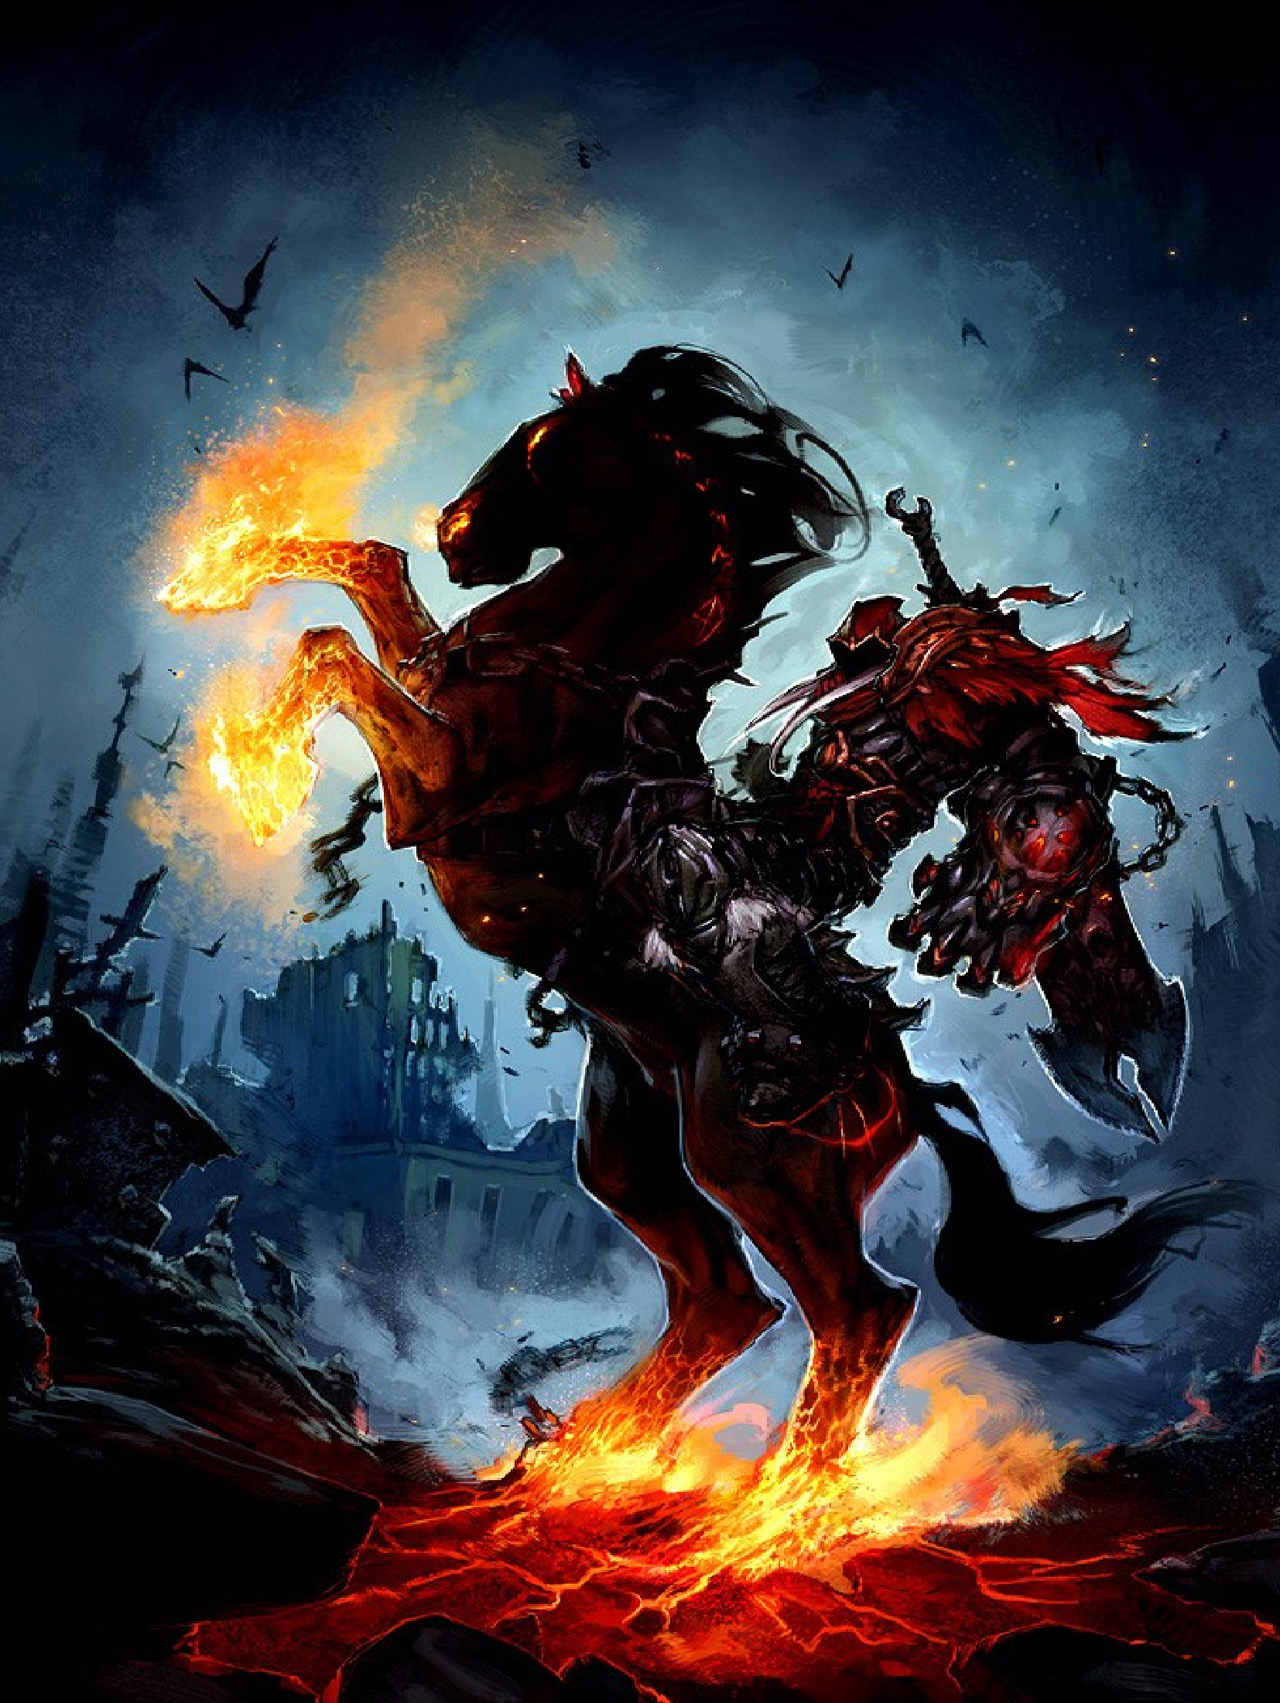 18526 free wallpaper 1440x2560 for phone, download images games, darksiders: wrath of war 1440x2560 for mobile